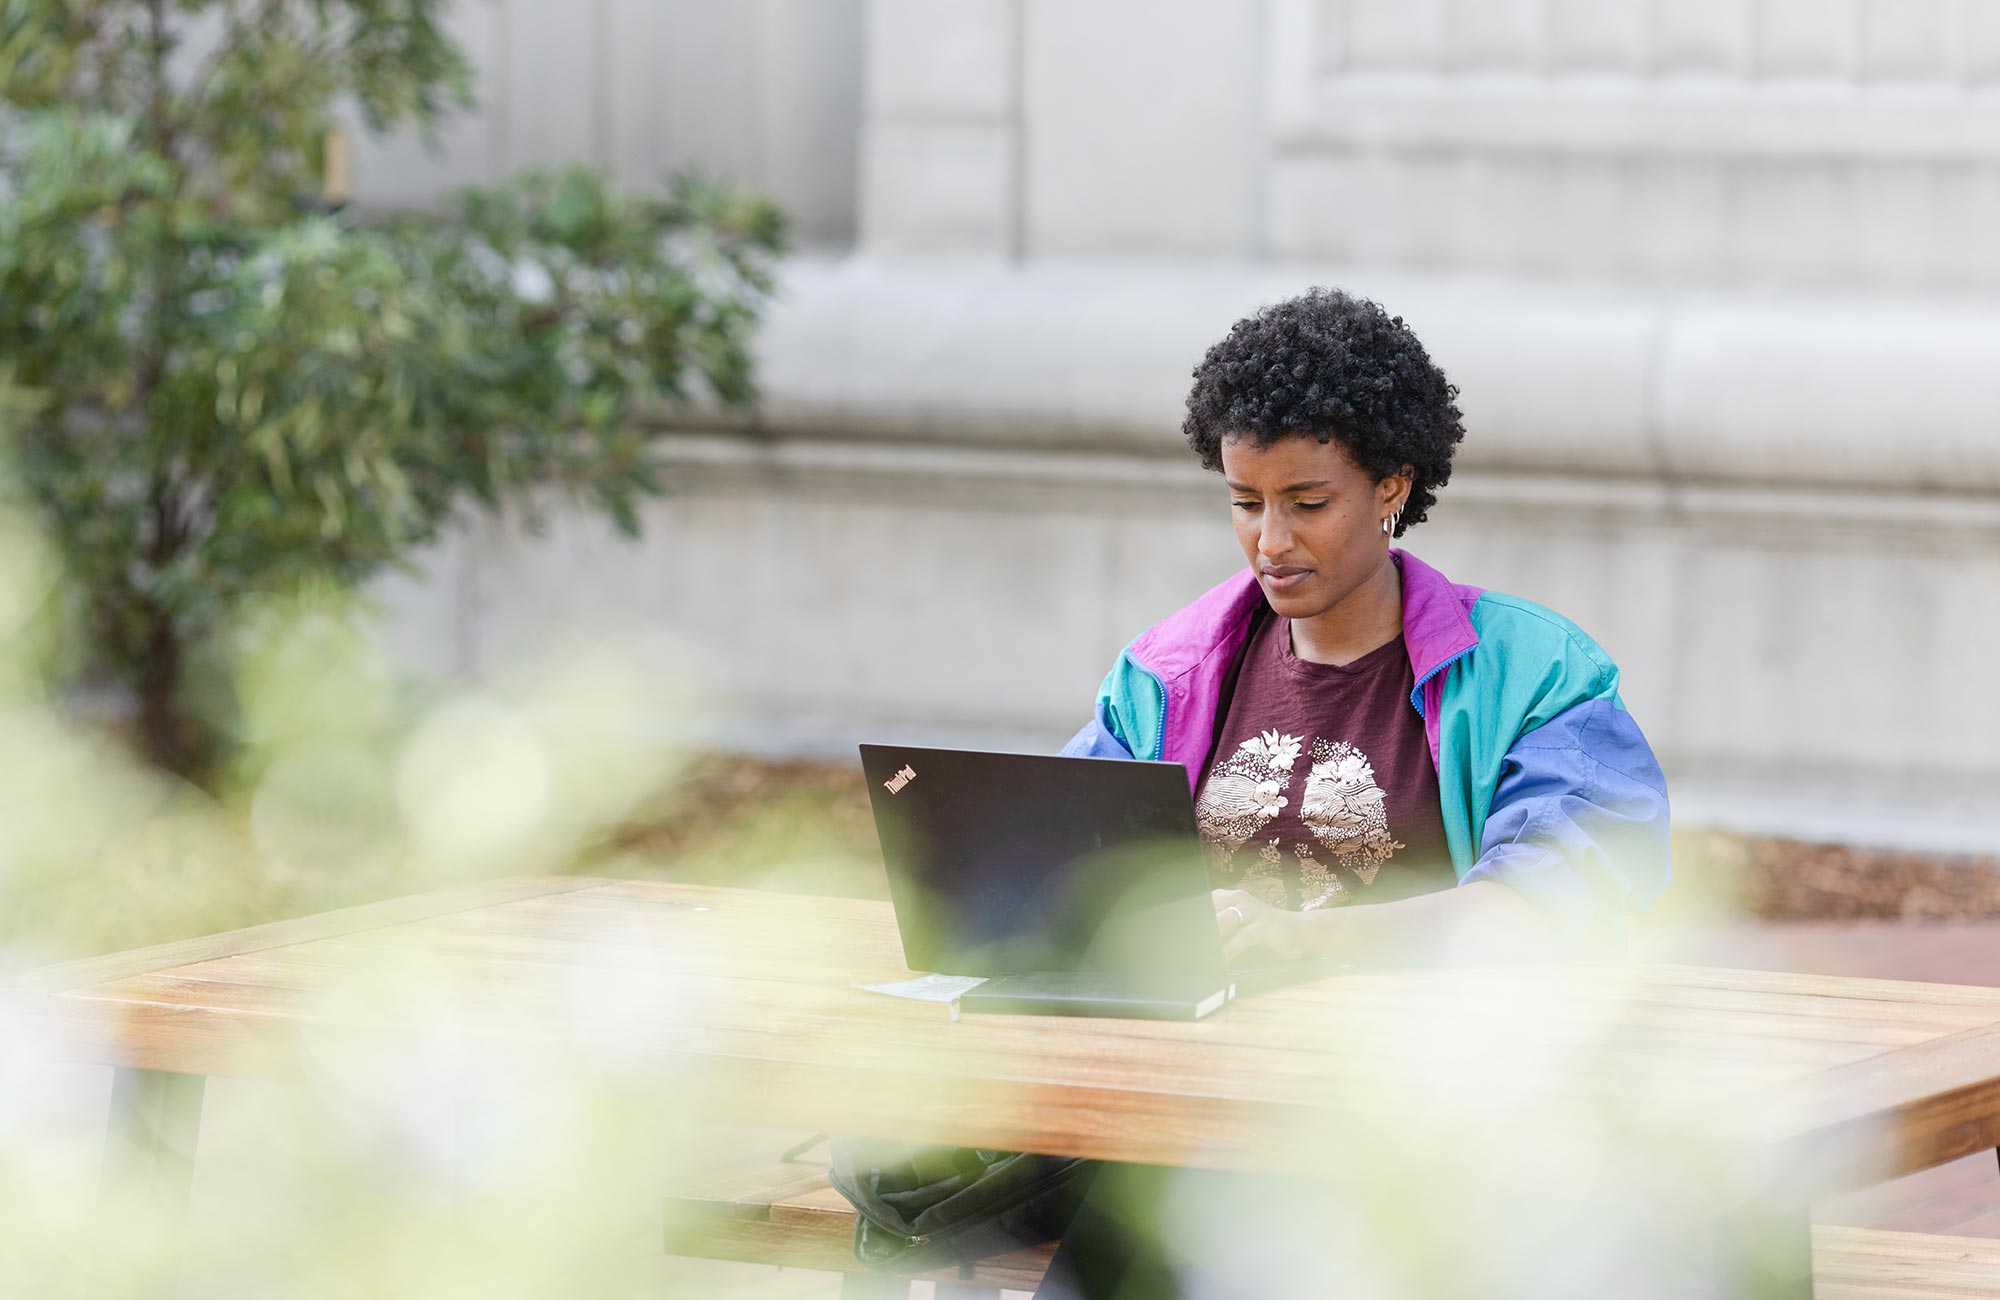 A diptych. On the left, Rediet Abebe sitting outside working on a laptop. On the right, a close-up of Abebe's laptop screen showing an article on increasing the presence of Black people in the field of artificial intelligence.